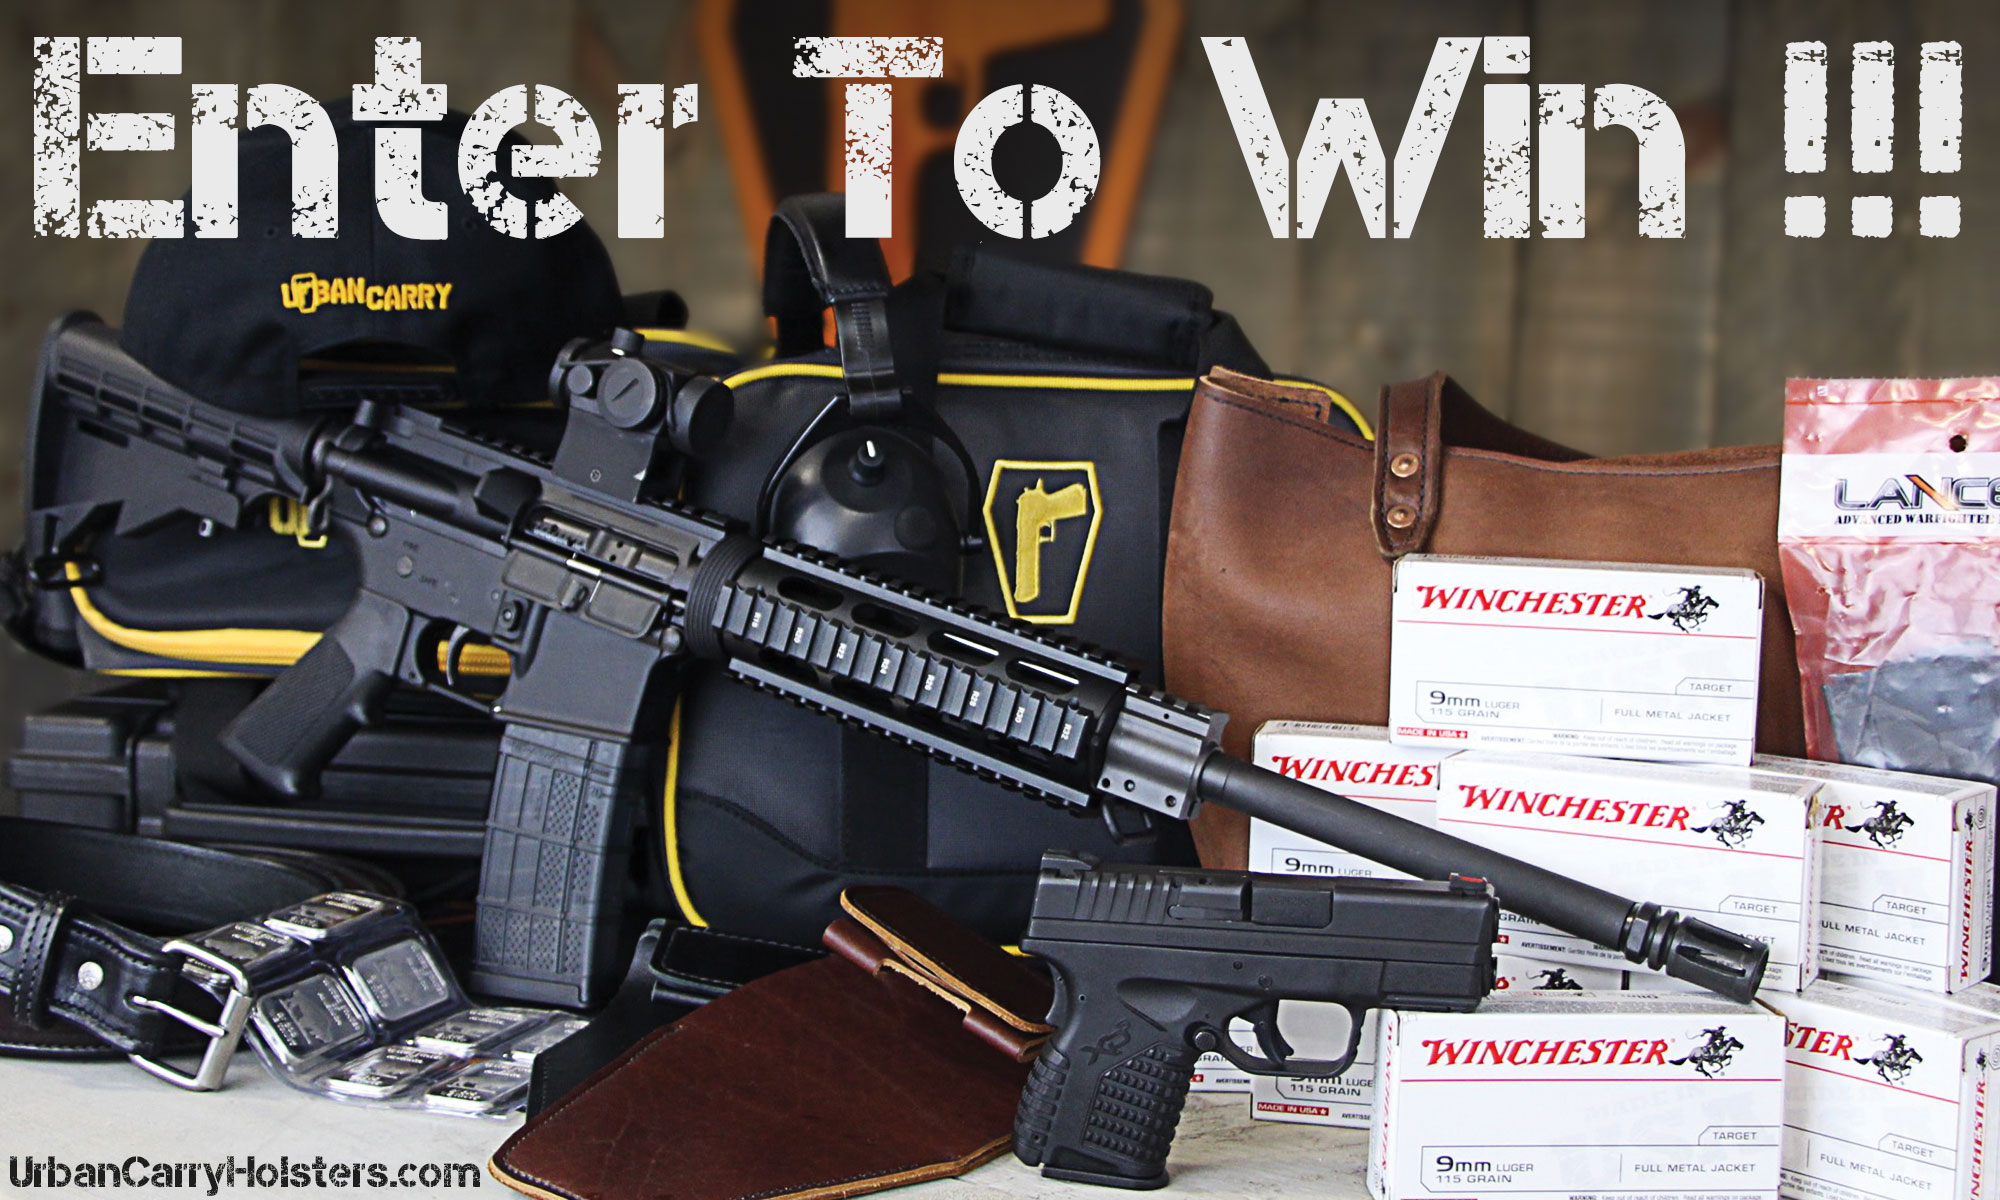 AR-15-Springfield-xds-free-giveaway-contest